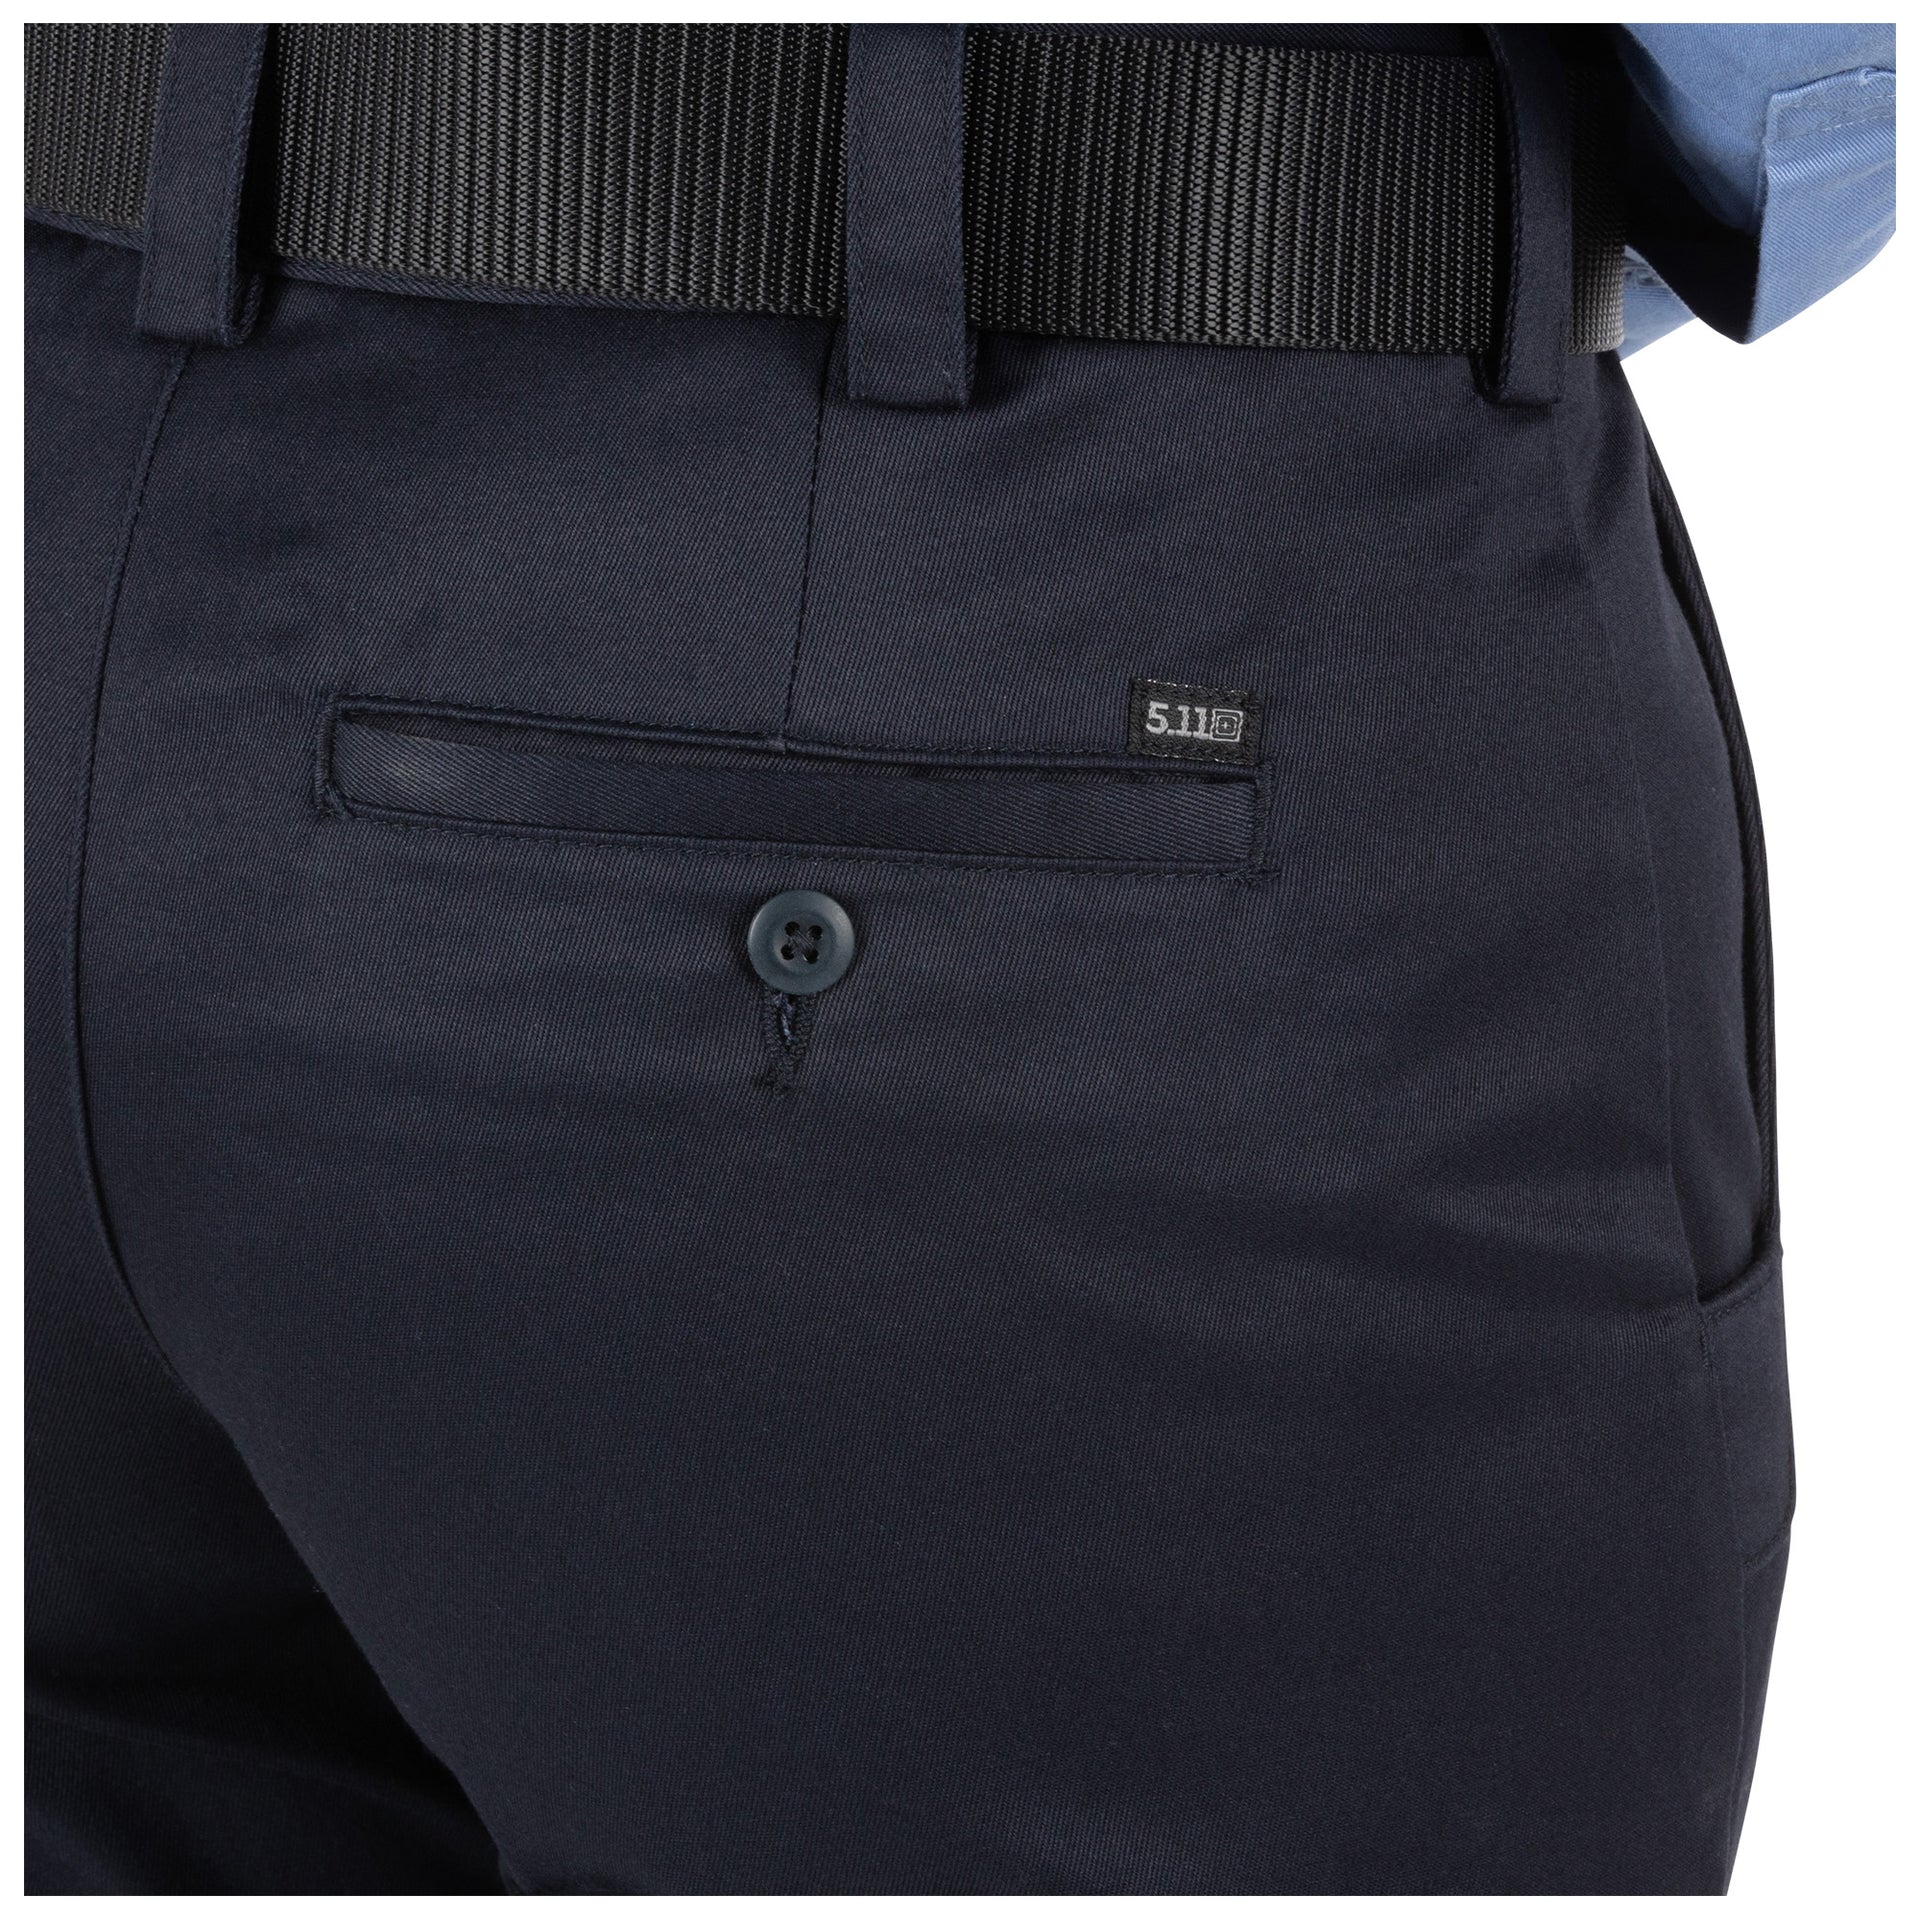 5.11 Tactical Women's Company Pant 2.0 (64435) | The Fire Center | Fuego Fire Center | FIREFIGHTER GEAR | Under pressure, close to the heat, the Company Pant 2.0 helps you stay focused and ready. Designed with proven, station-ready features, this pant is certified to NFPA 1975 (2019 edition). It’s constructed with a Tough Cotton™